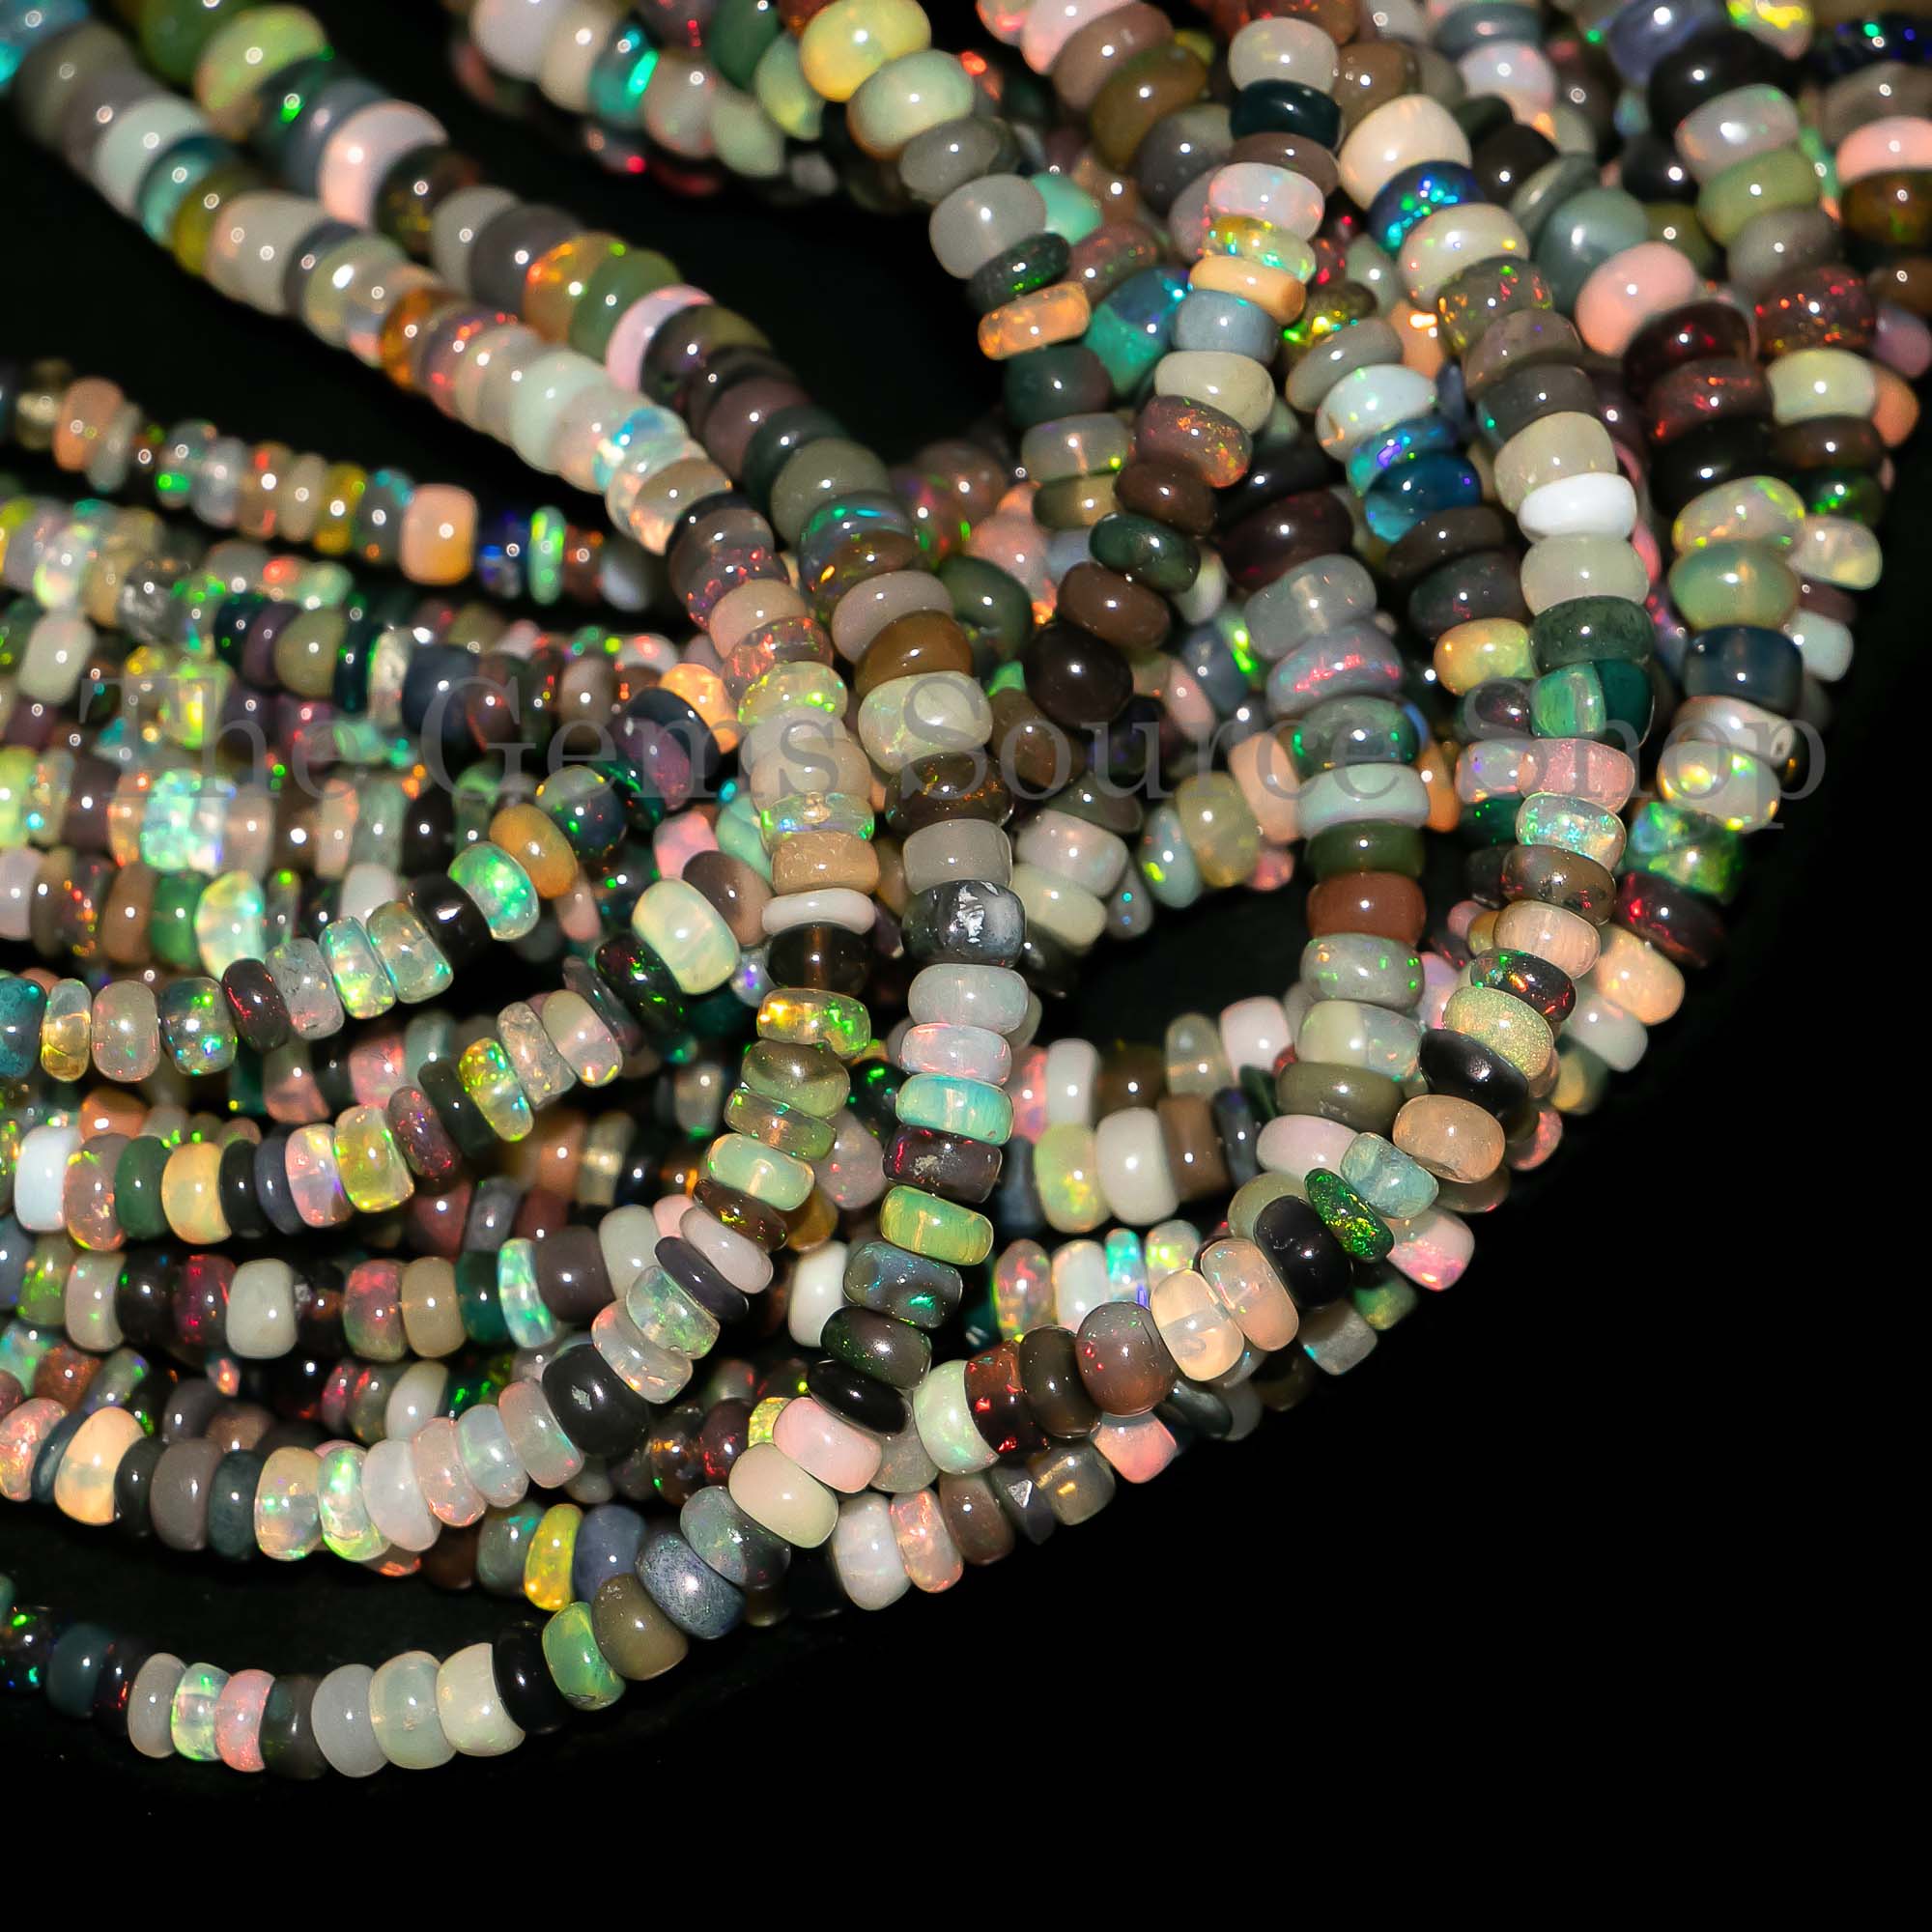 Disco Opal Beads, Disco Opal Smooth Beads, Disco Opal Rondelle Beads, Wholesale Beads